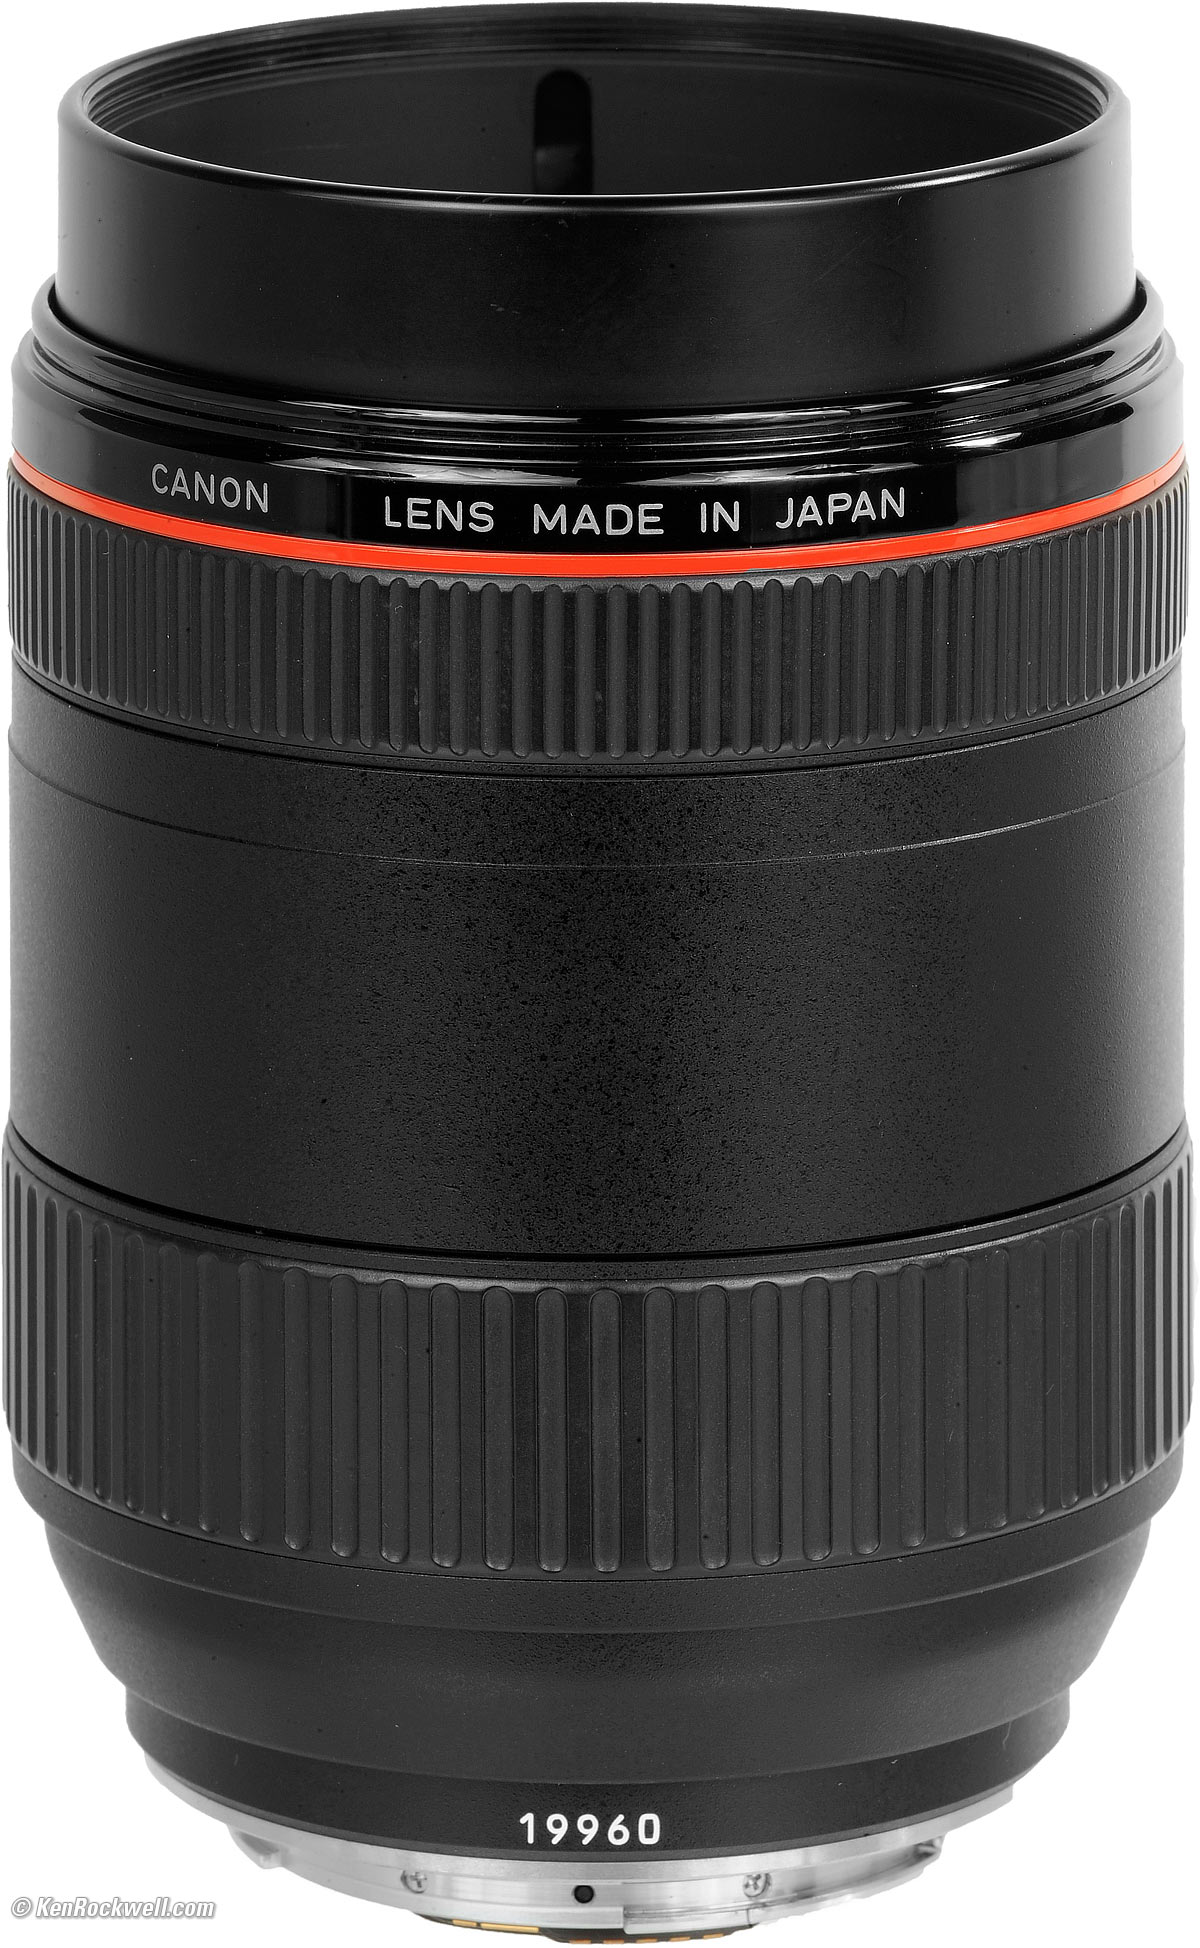 Canon EF 28-80mm f/2.8-4L USM Review